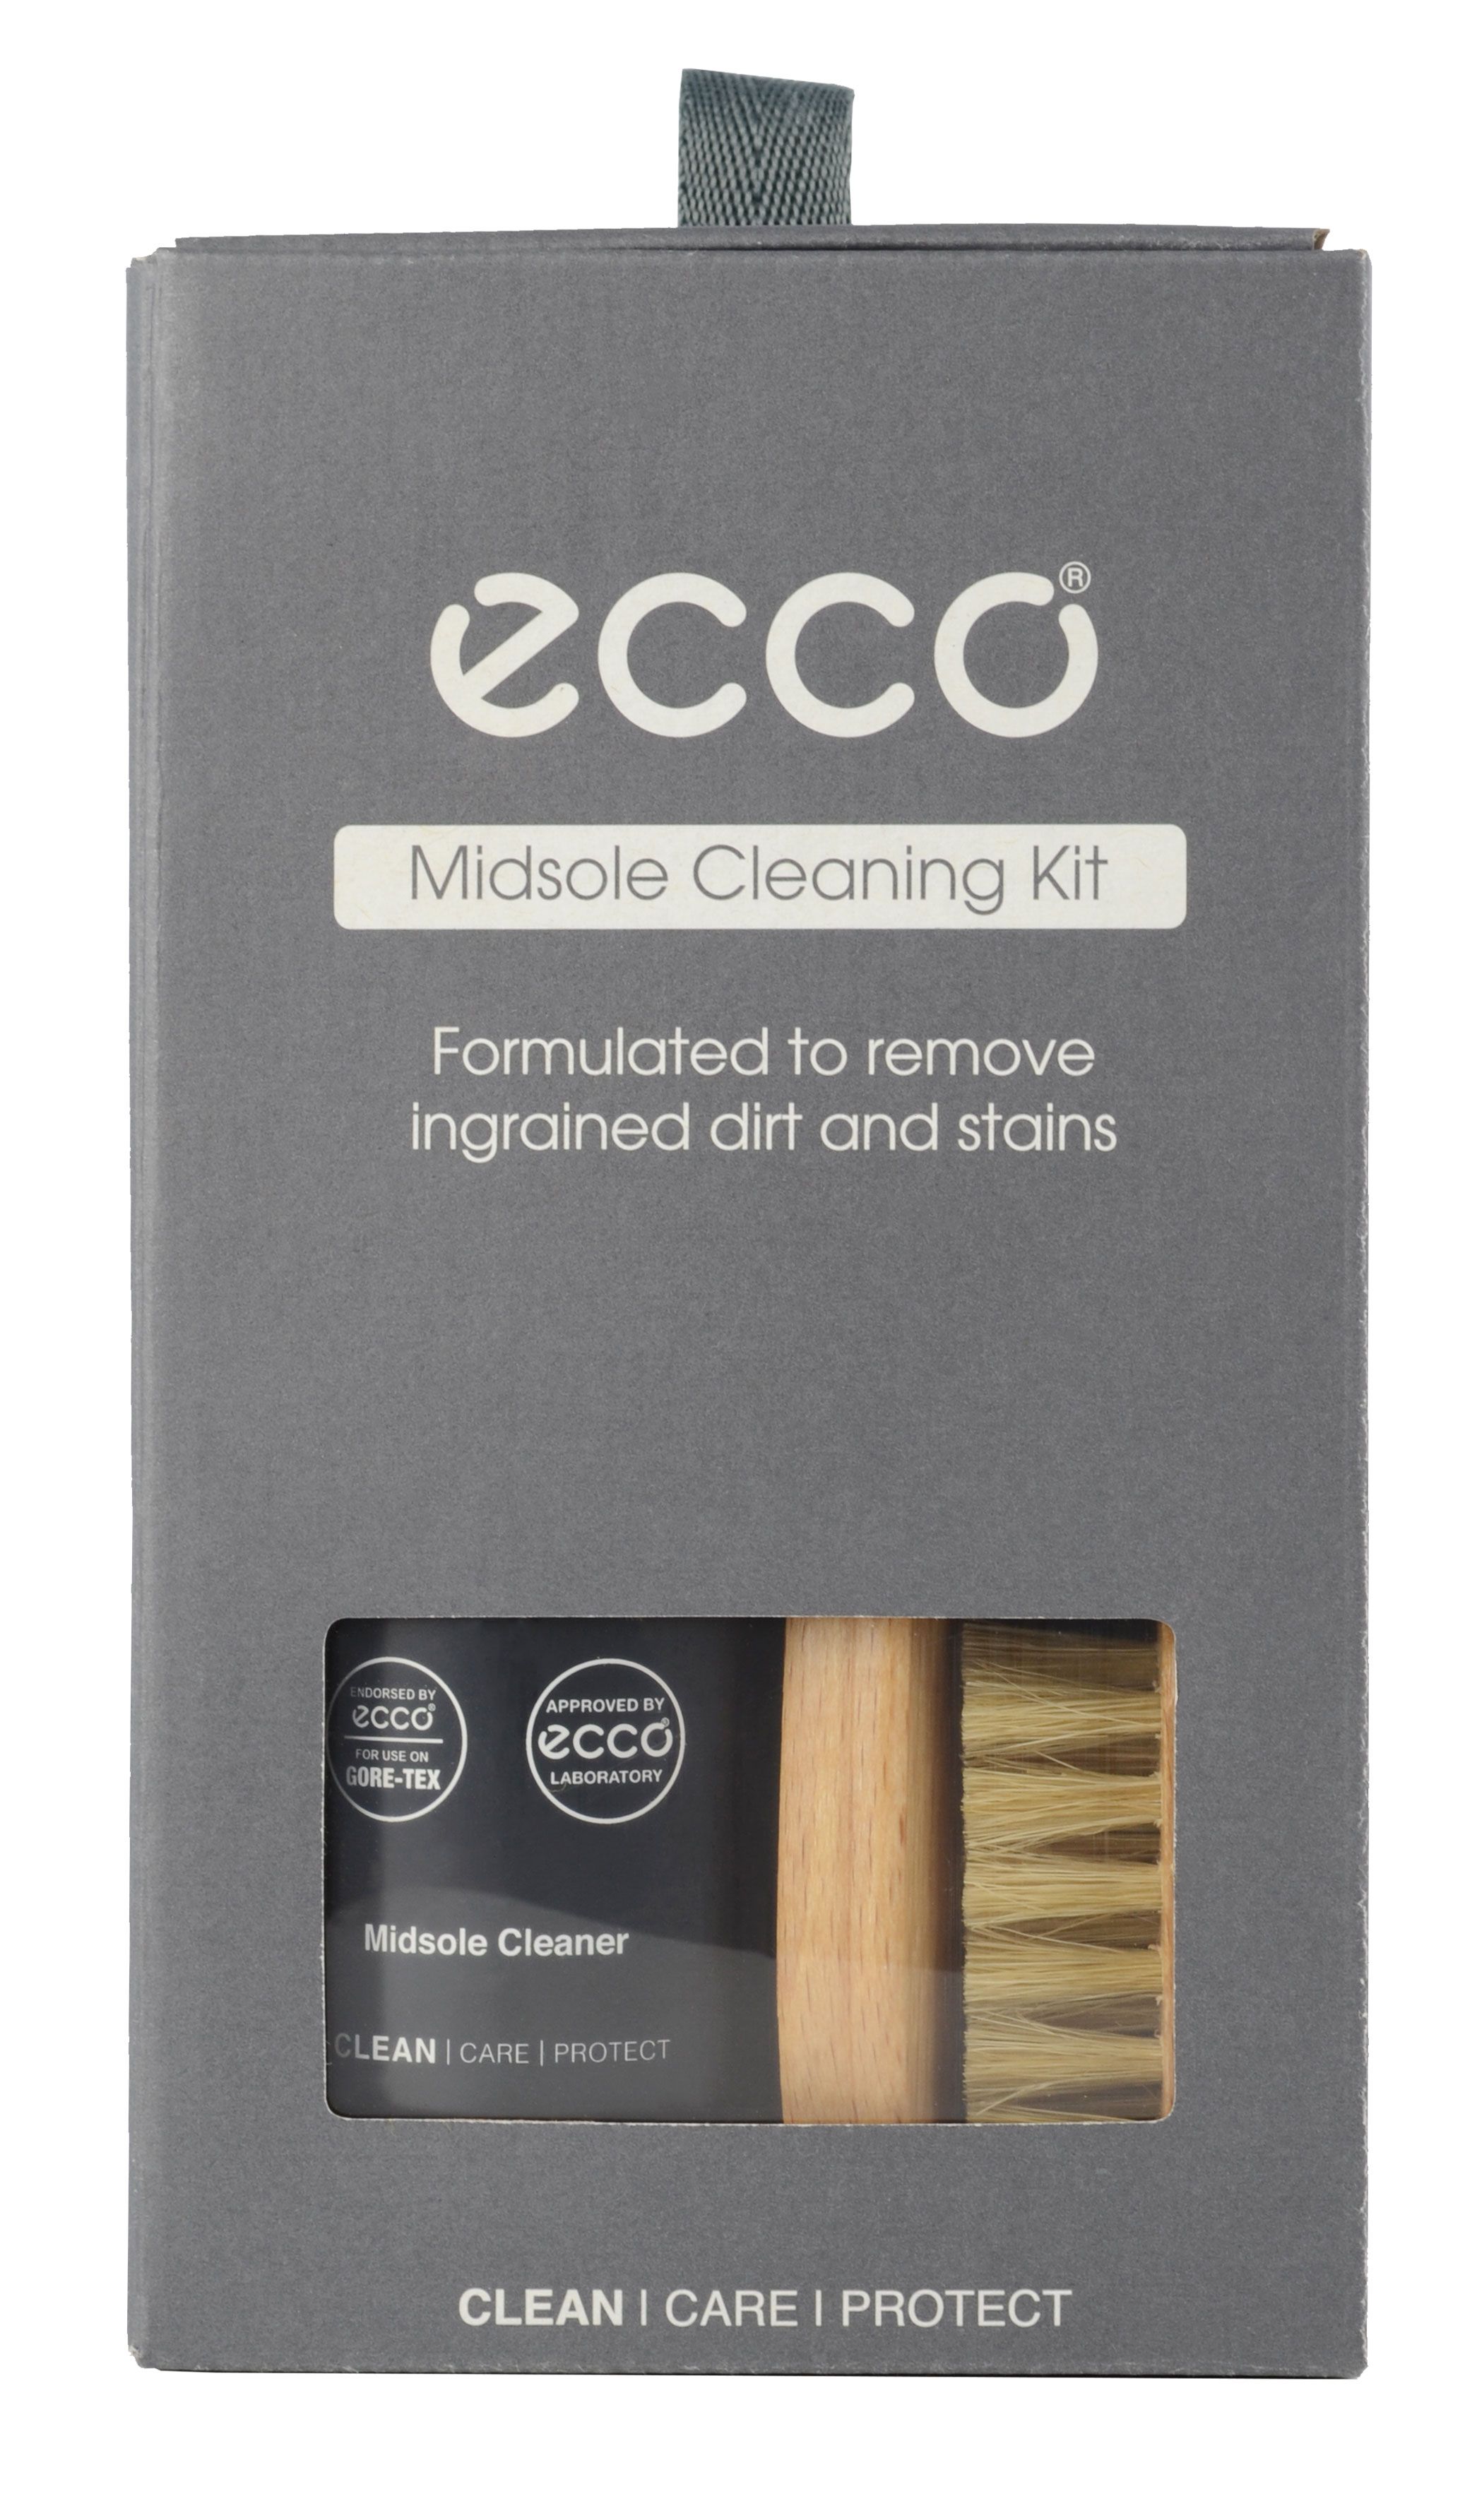 Midsole Cleaning Kit - ECCO.com